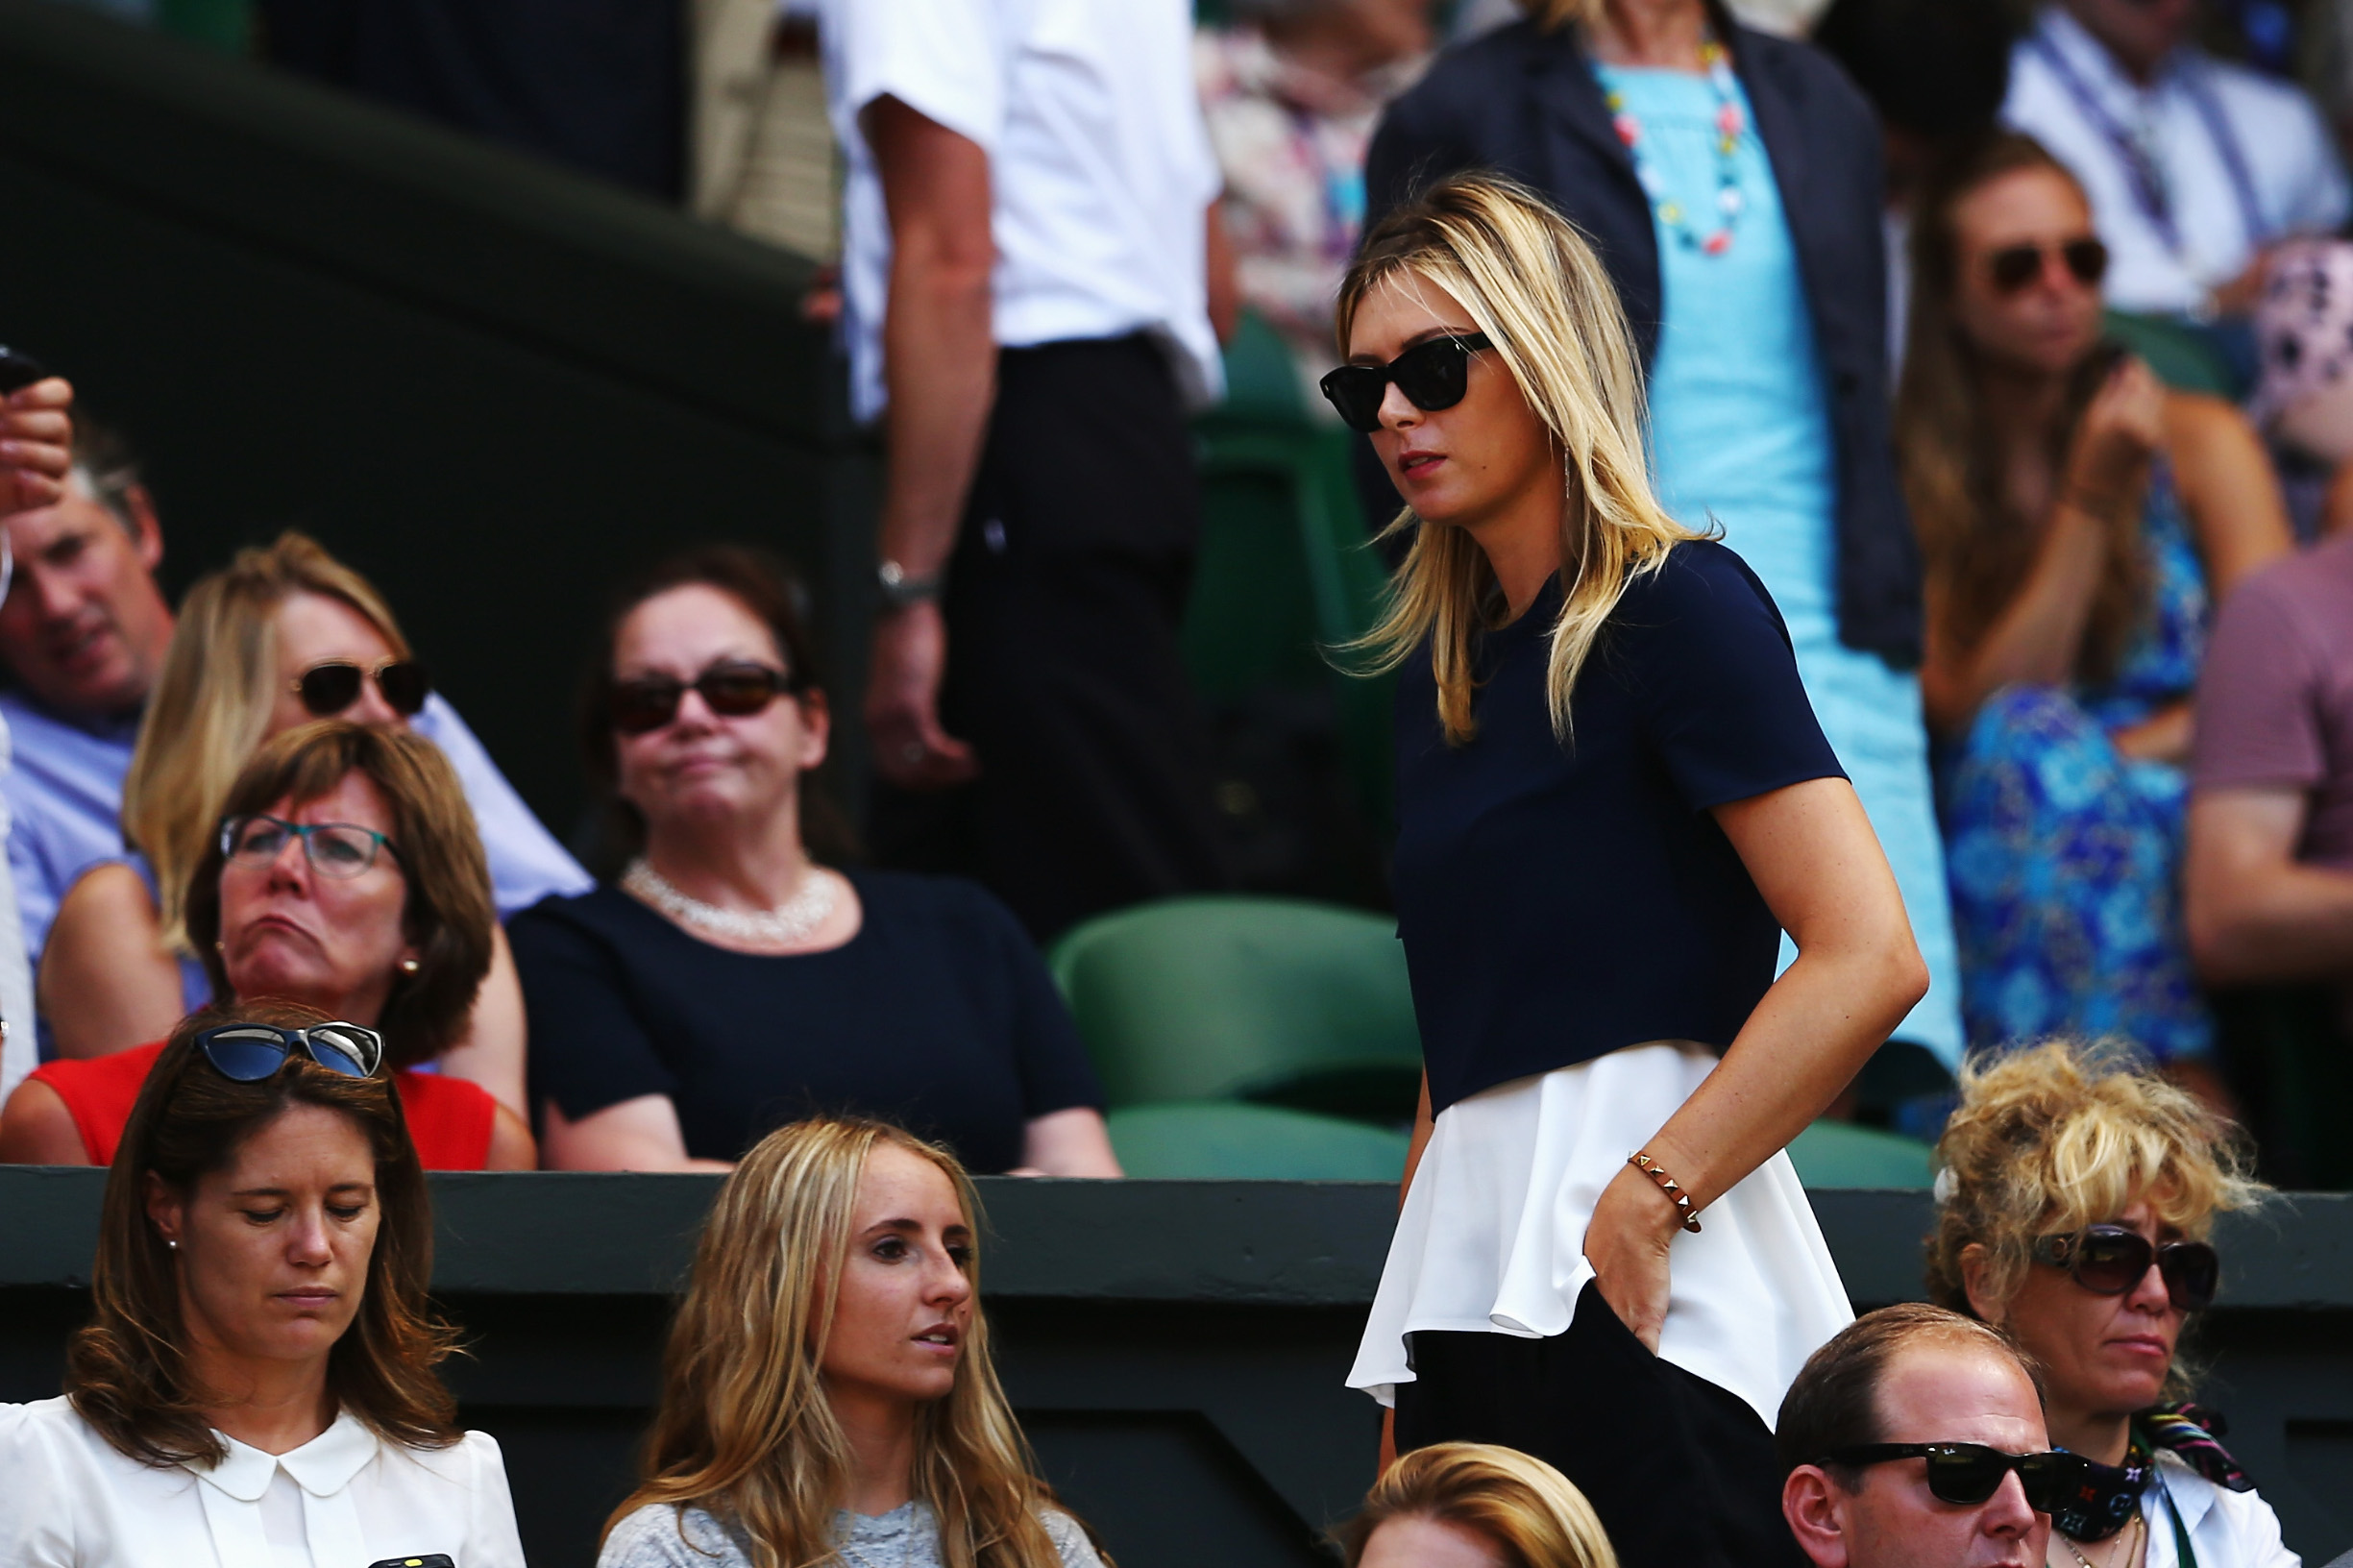 LONDON, ENGLAND - JULY 04:  Maria Sharapova of Russia the girlfriend of Grigor Dimitrov of Bulgaria watches his Gentlemen's Singles semi-final match against Novak Djokovic of Serbia on day eleven of the Wimbledon Lawn Tennis Championships at the All England Lawn Tennis and Croquet Club on July 4, 2014 in London, England.  (Photo by Clive Brunskill/Getty Images)